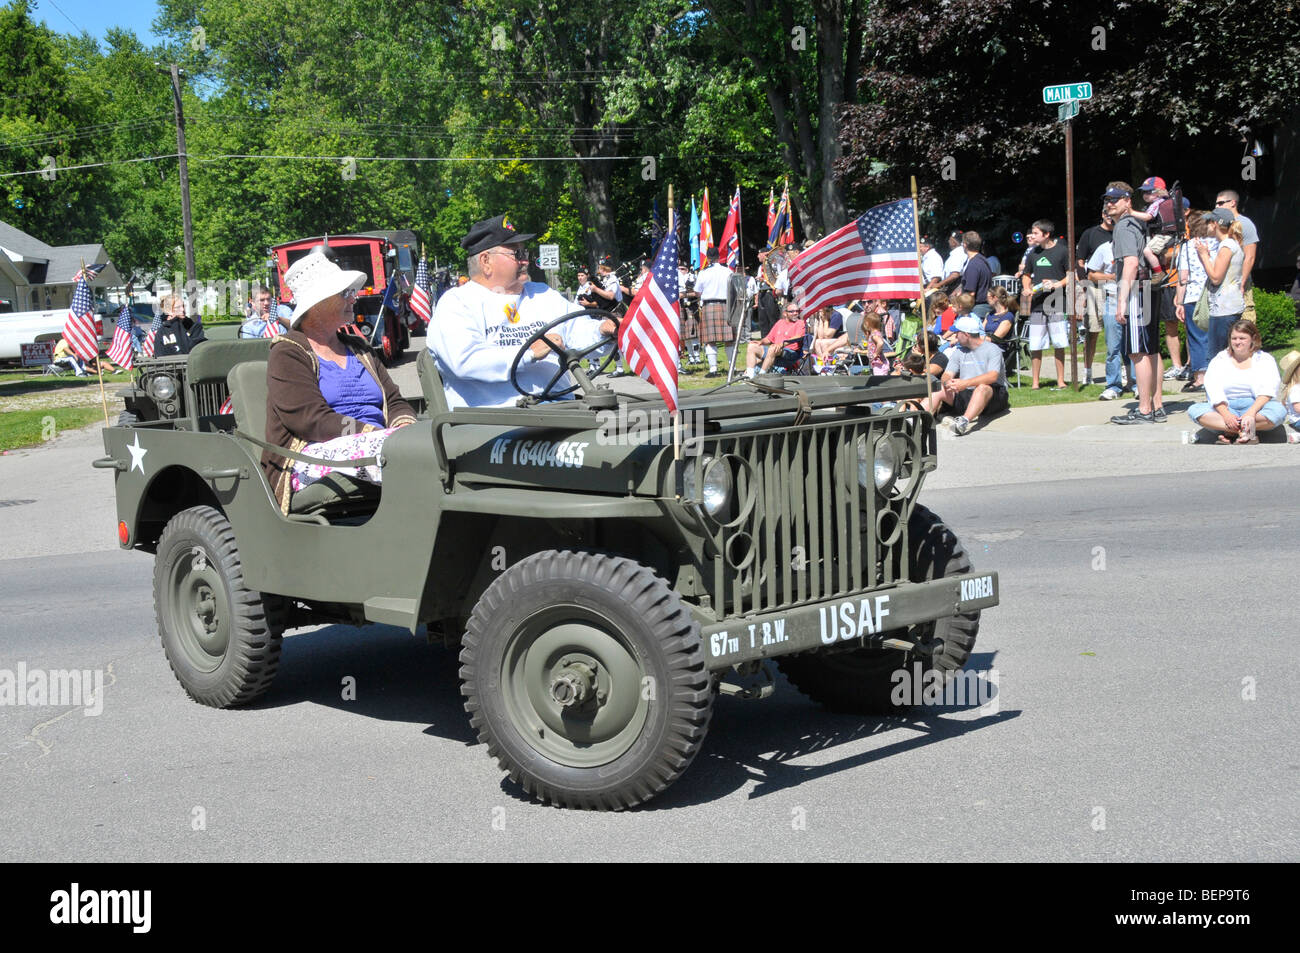 Military vehicle in patriotic parade Stock Photo